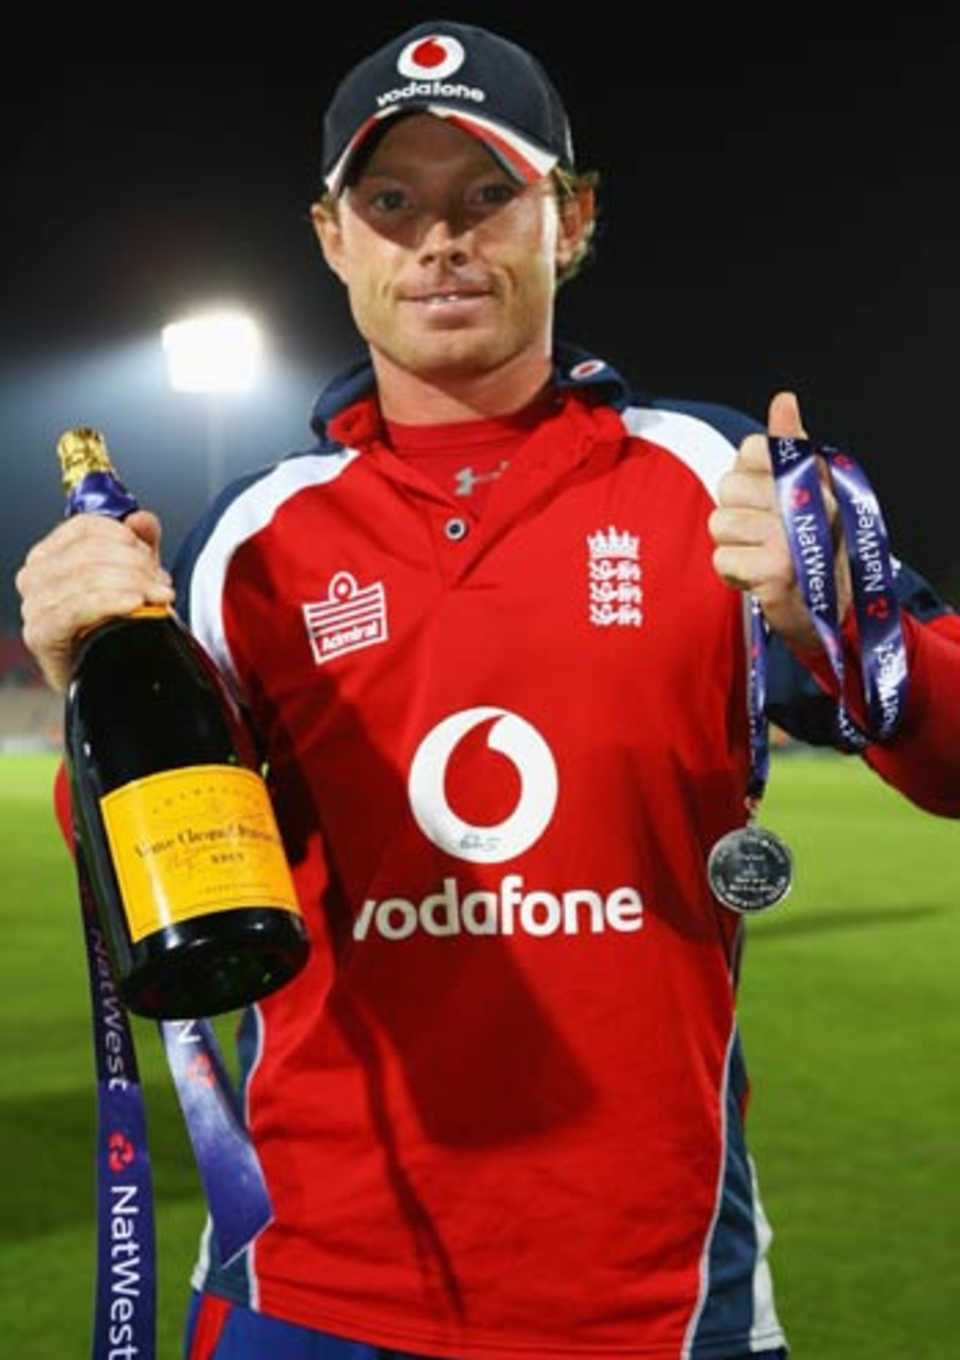 Ian Bell set up the comprehensive victory with a maiden ton and won the Man-of-the-Match award, England v India, 1st ODI, Southampton, August 21, 2007